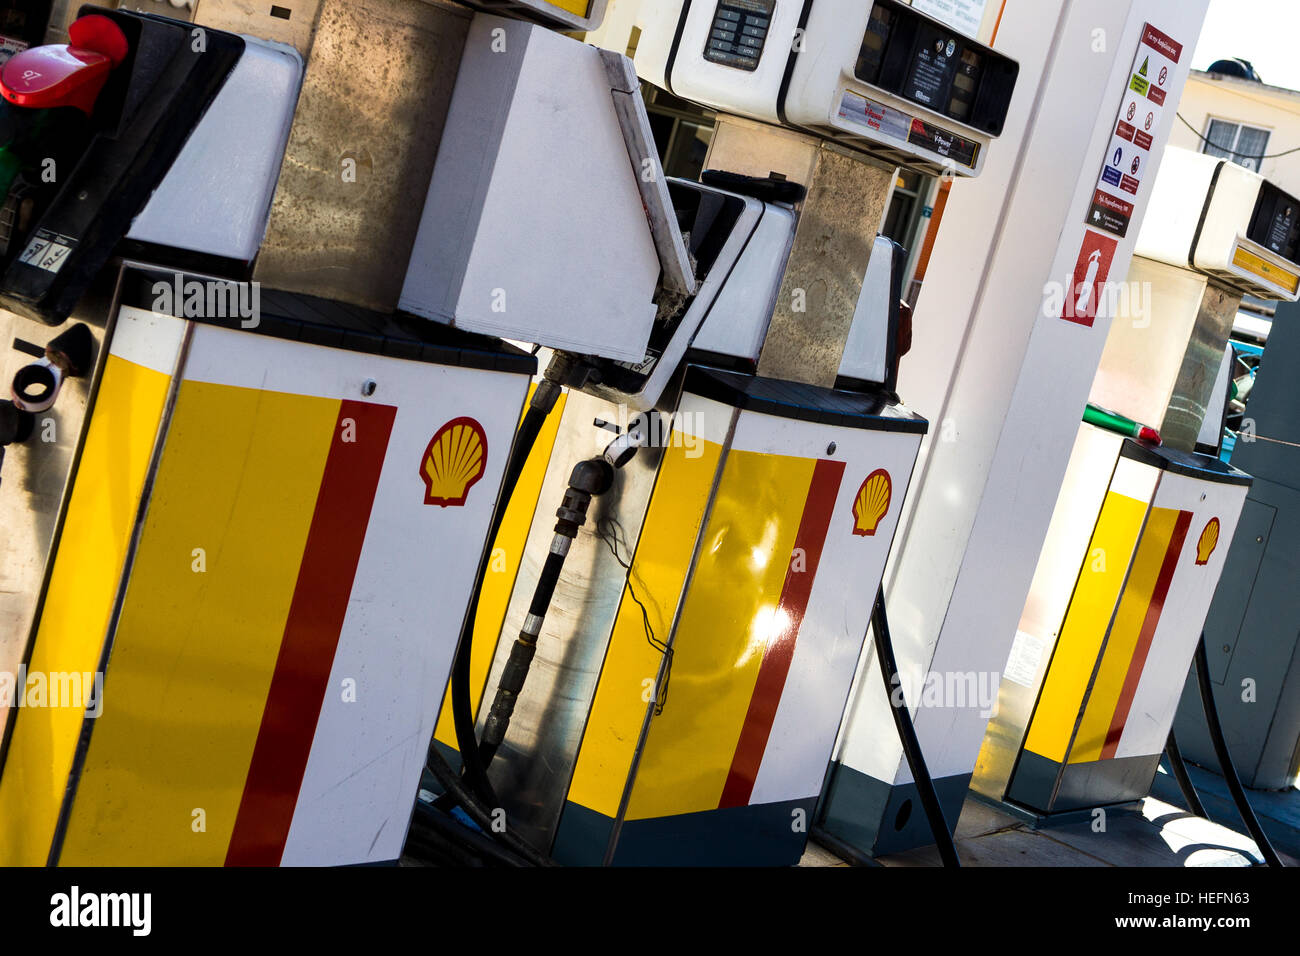 Shell petrol station pumps. Cephalonia harbour Greece Stock Photo